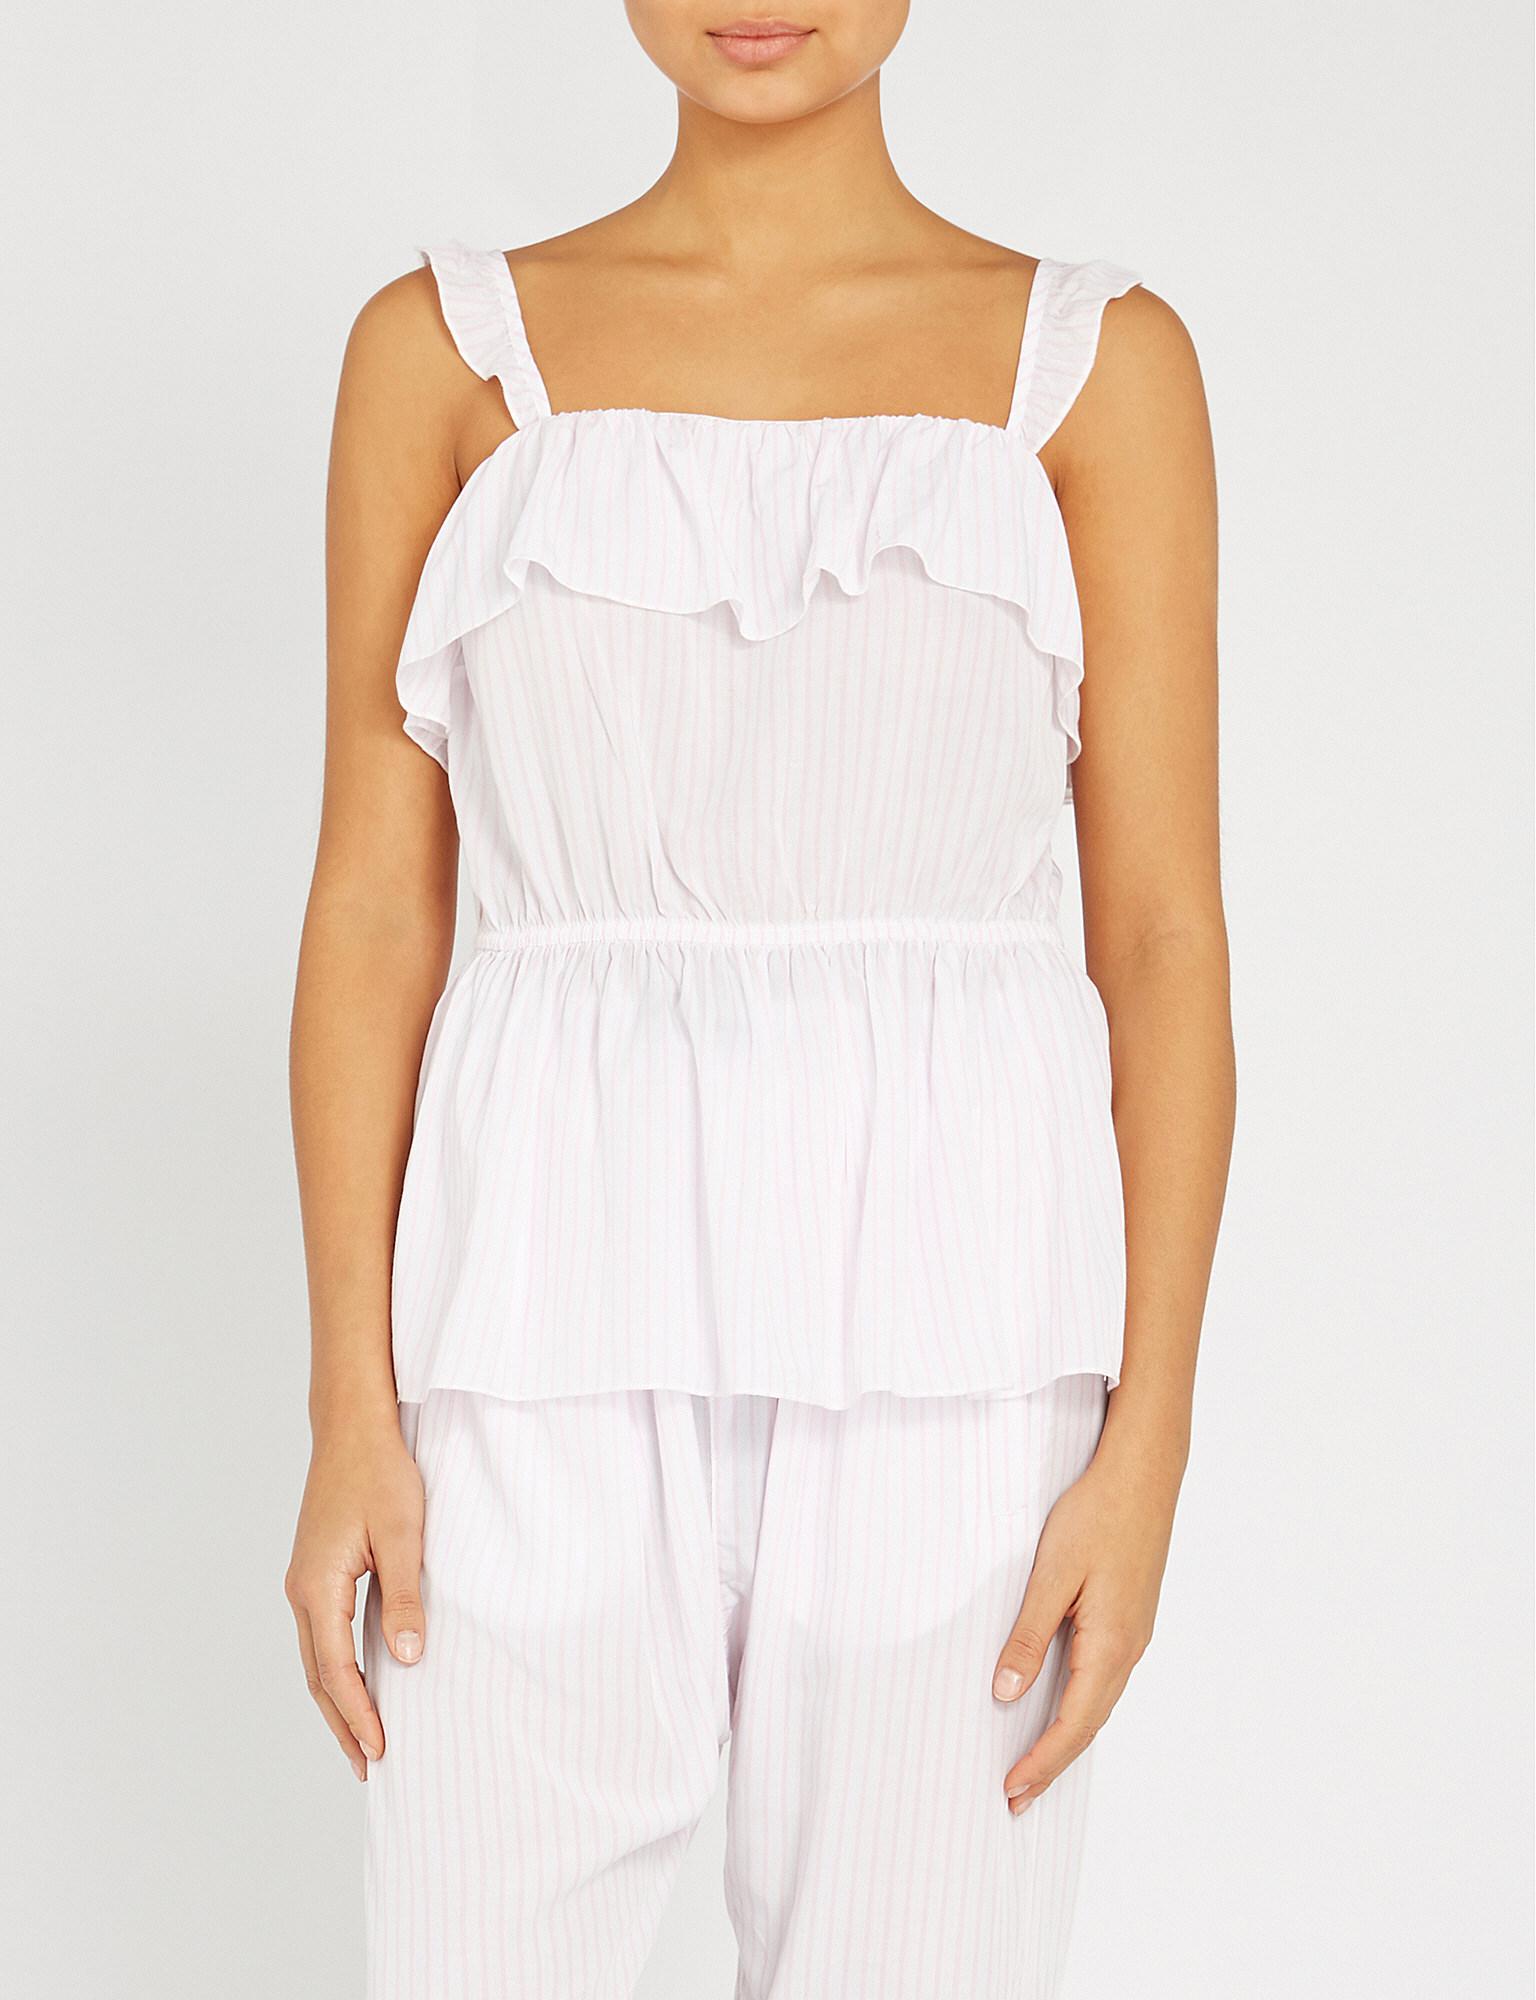 Lyst - Peter Alexander Striped Woven Pyjama Top in White